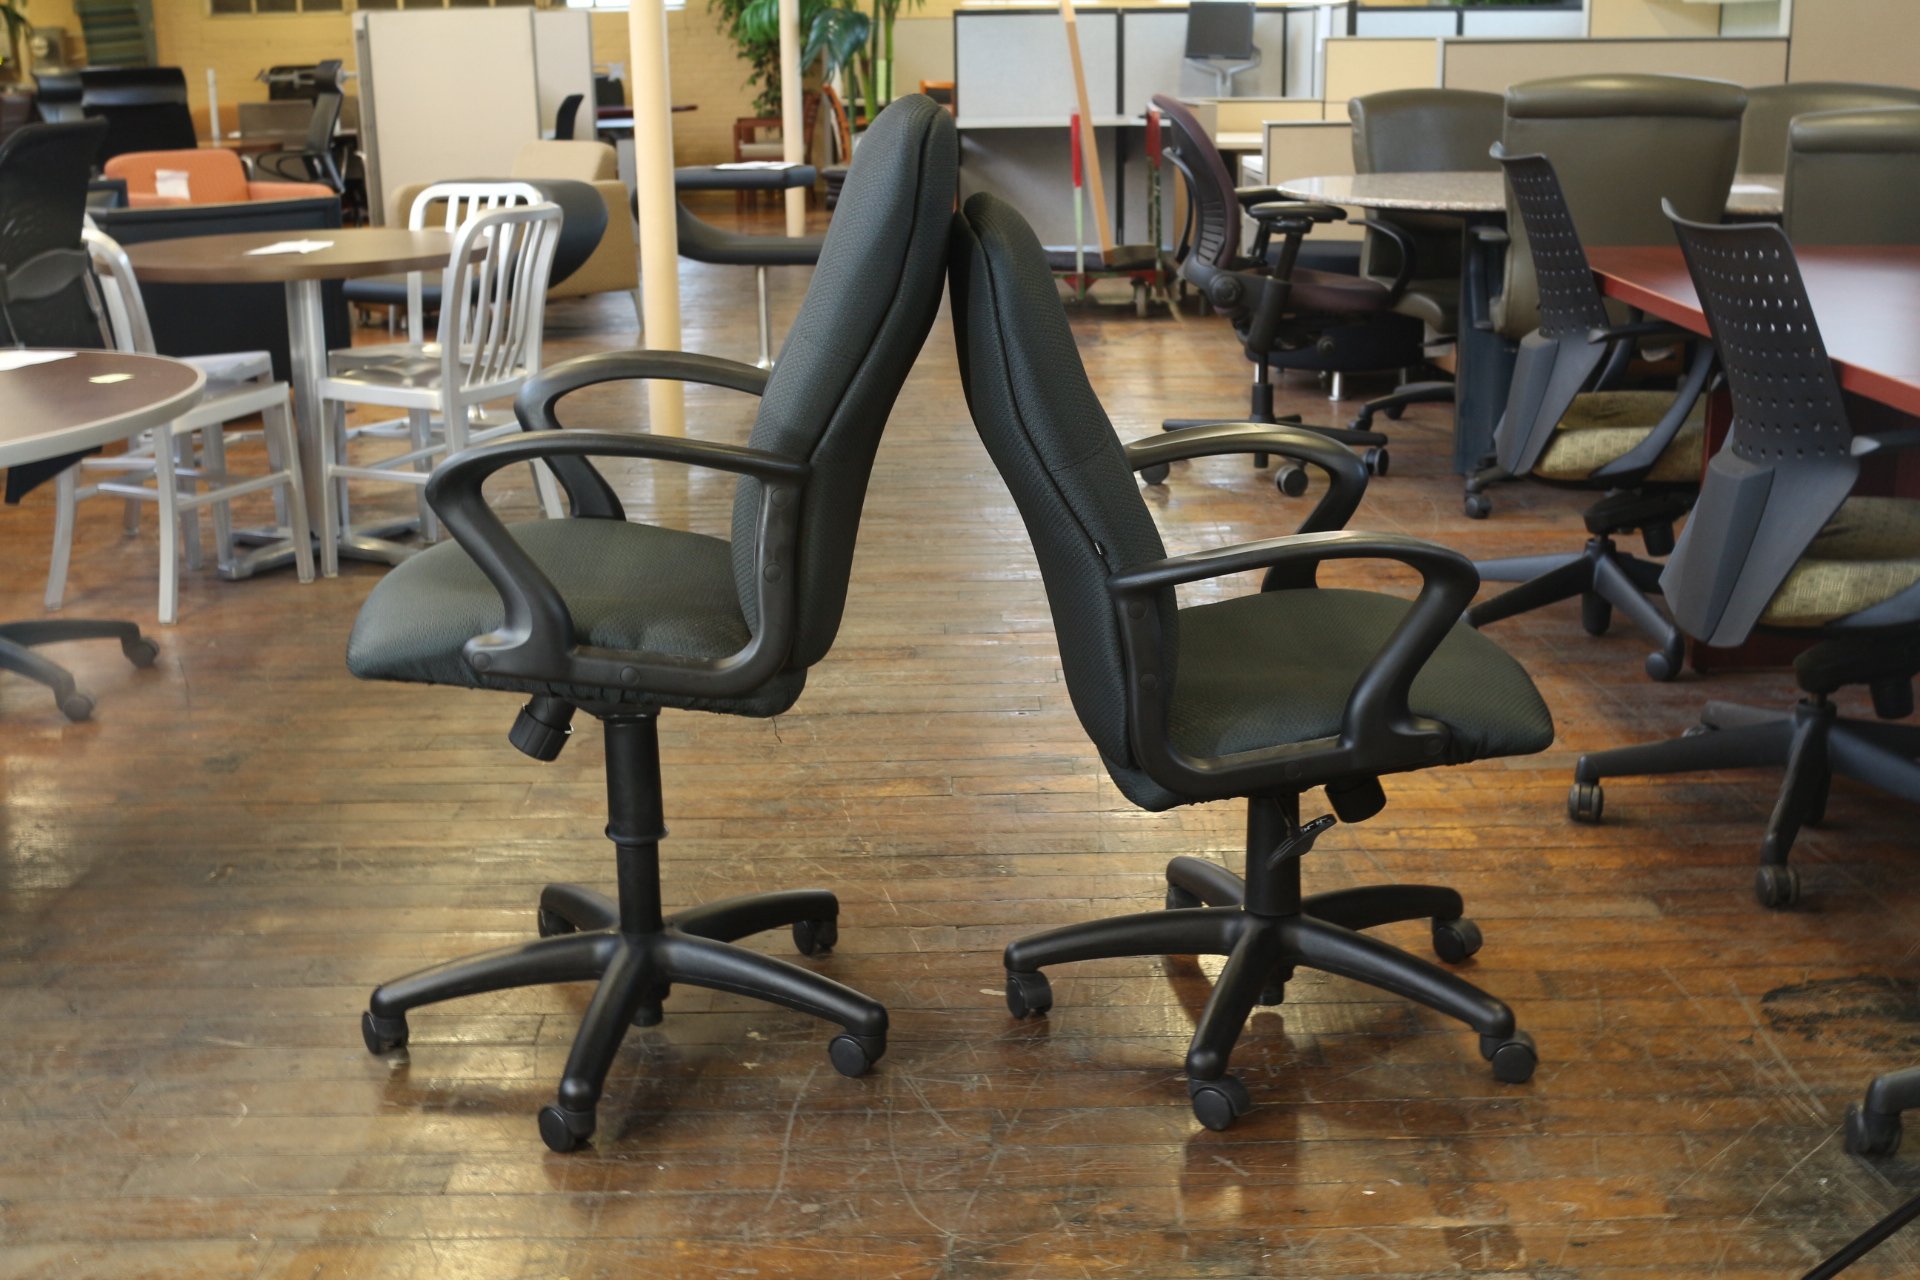 Hon Black Fabric Conference Chairs (Used)